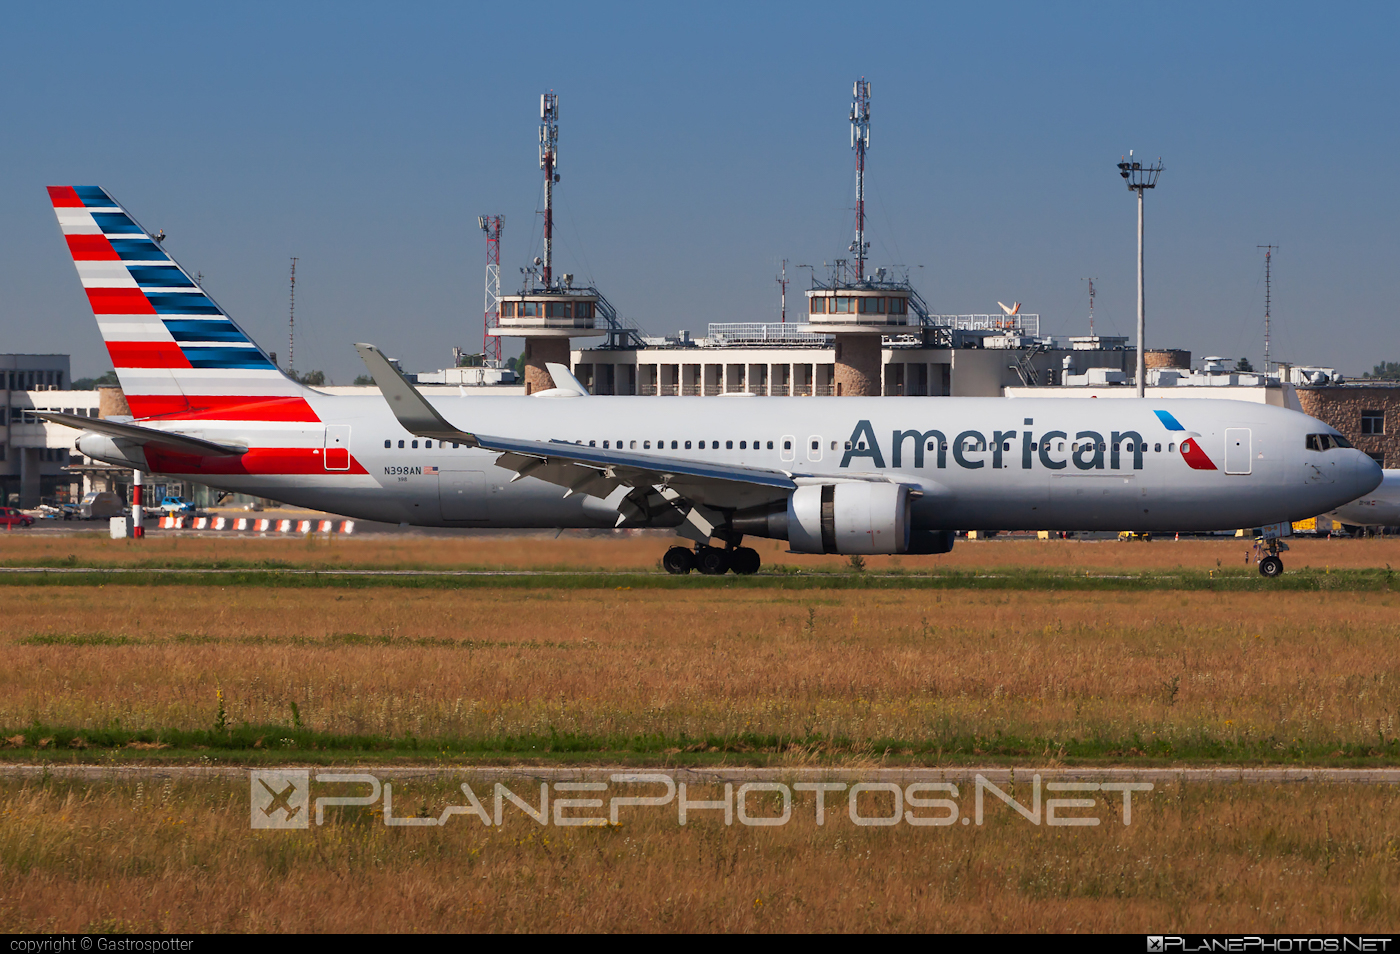 Boeing 767-300ER - N398AN operated by American Airlines #americanairlines #b767 #b767er #boeing #boeing767